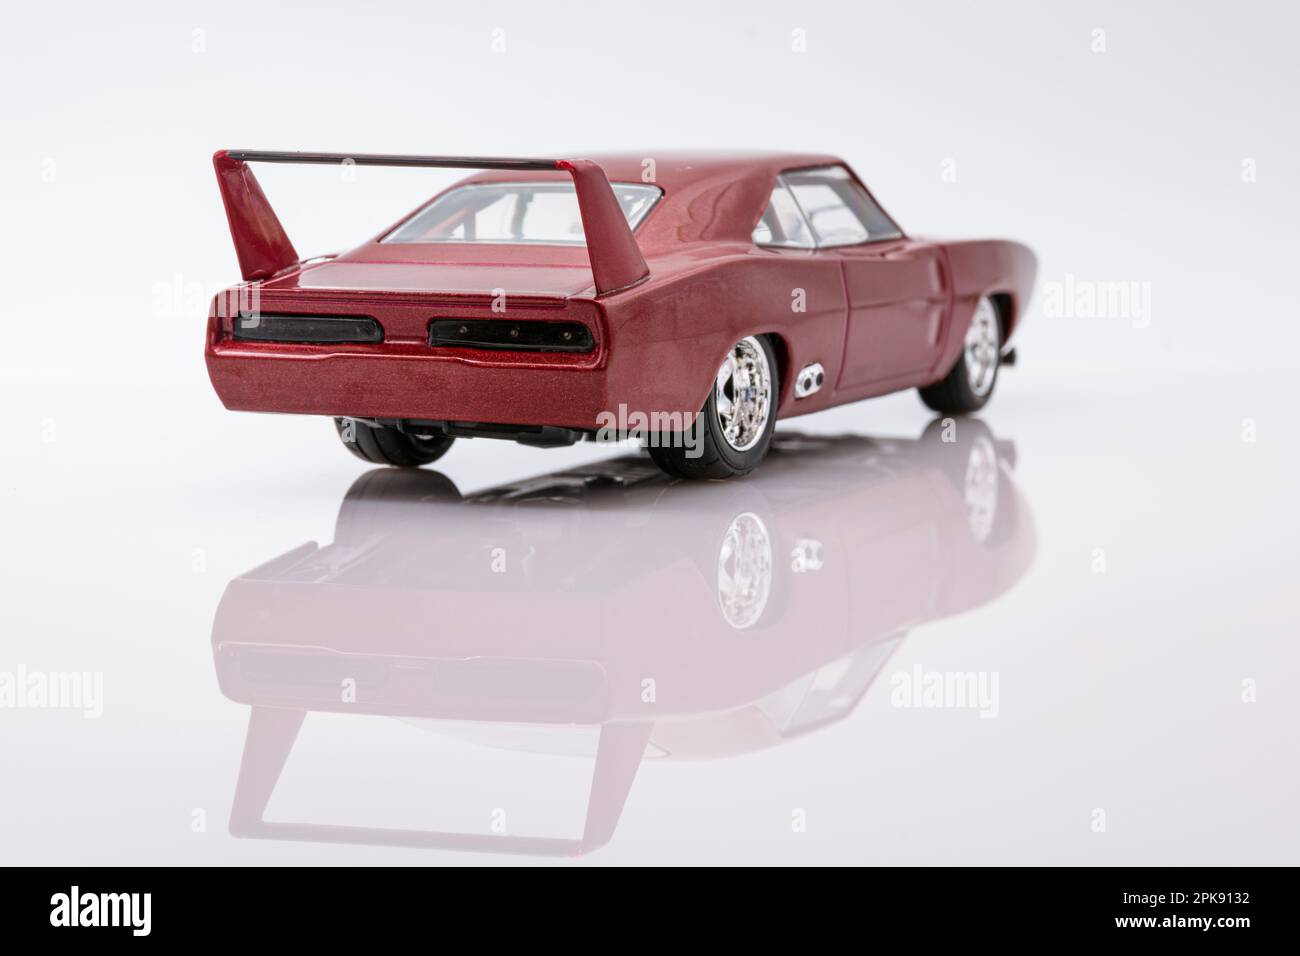 Fast&Furious Dodge Charger Daytona 1969  1:43 model car, rear view, white background with reflection Stock Photo